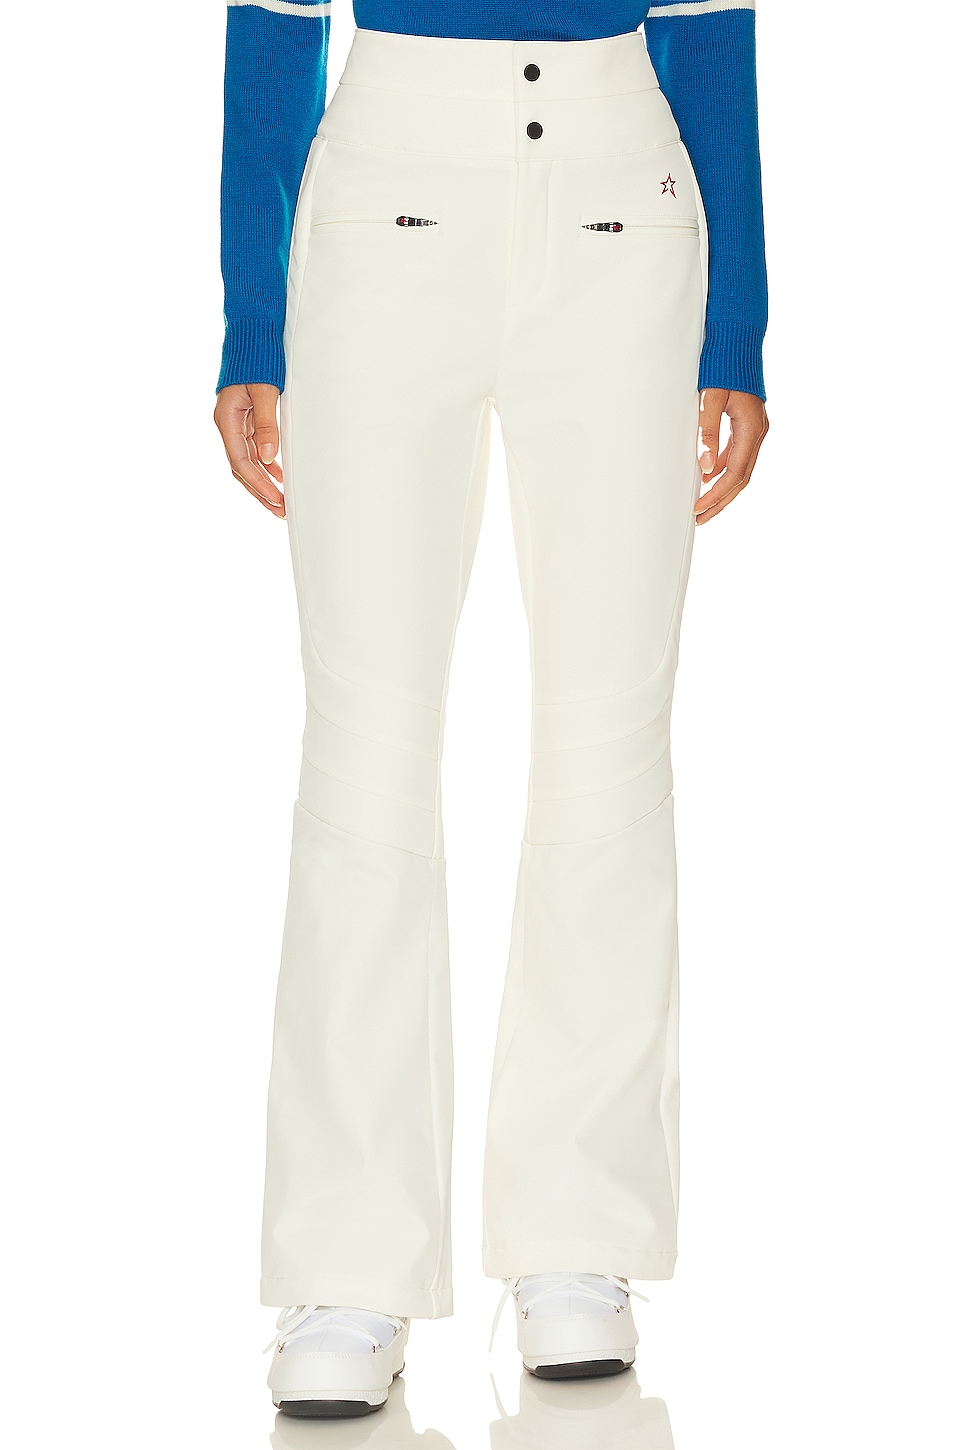 Perfect Moment Women's Aurora Flare Pant –